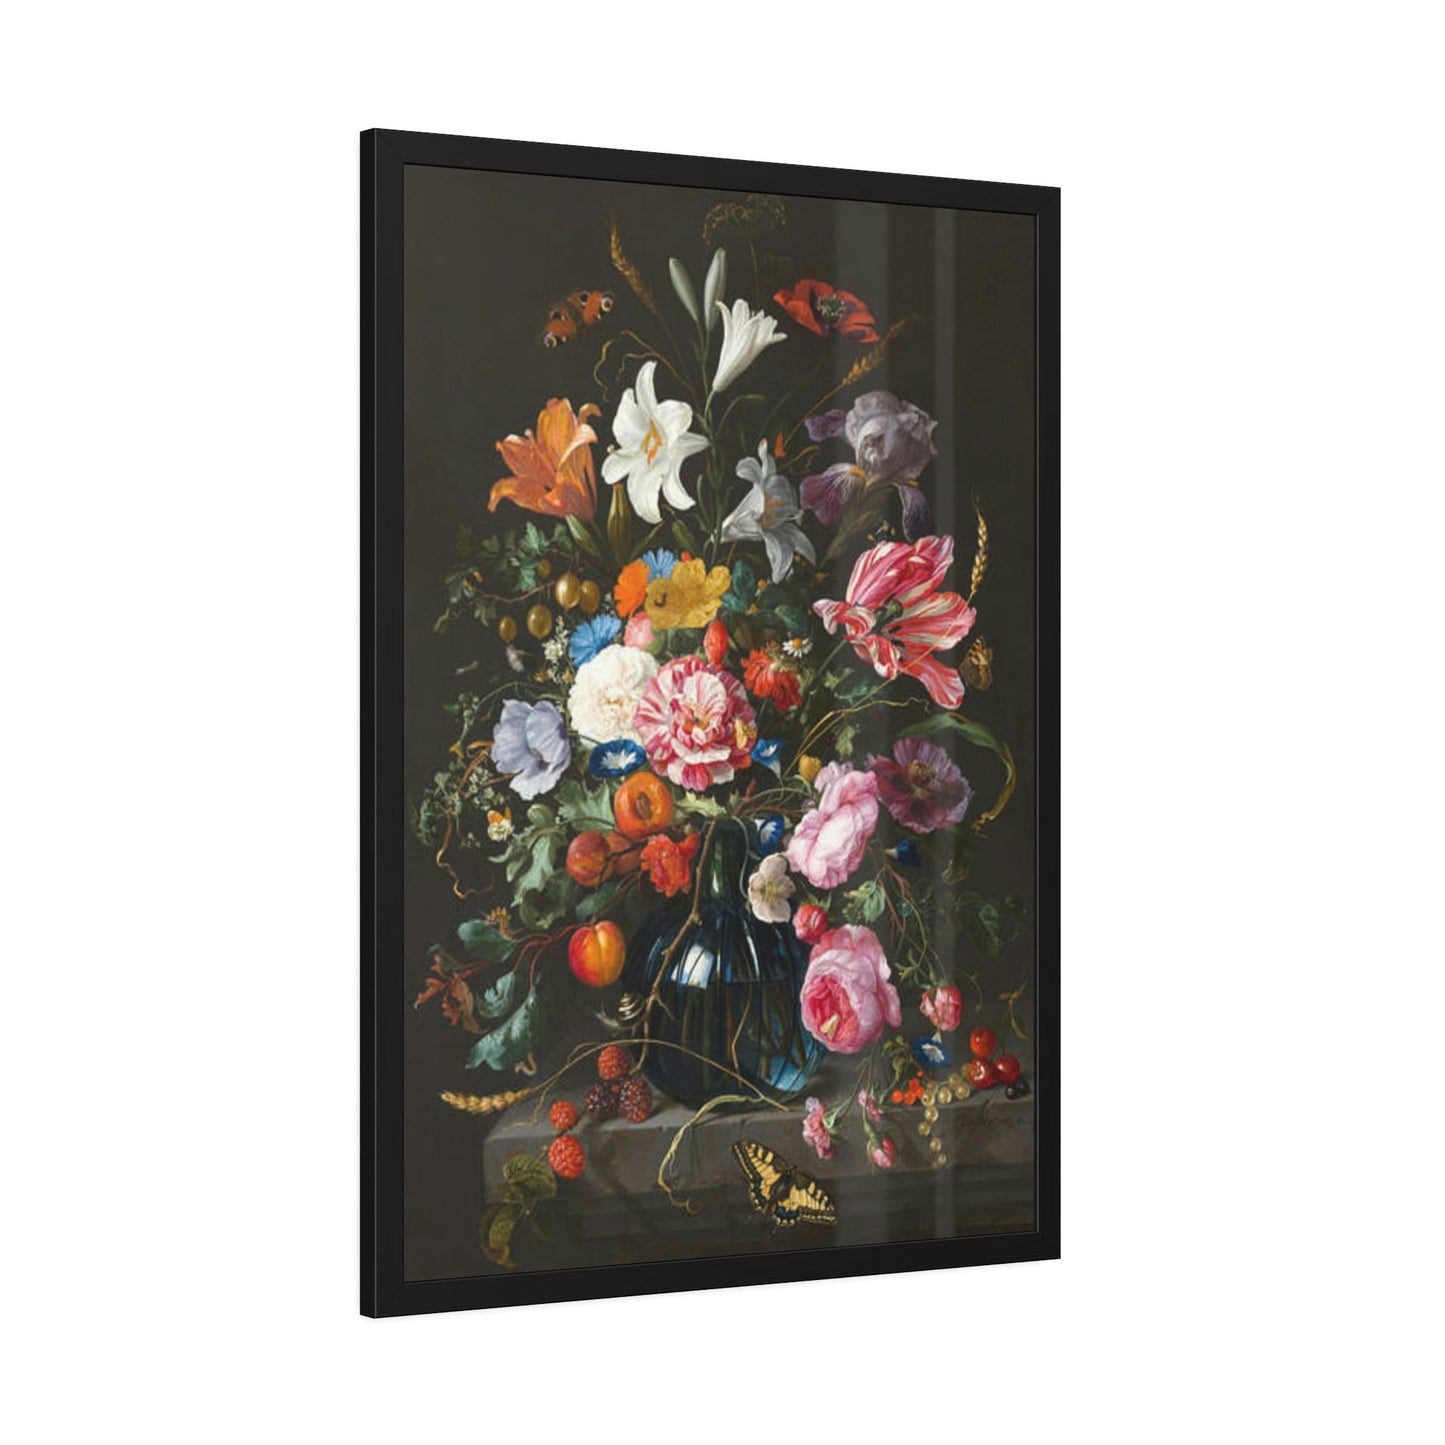 Vibrant Blooms in Print: Canvas and Wall Art of Colorful Flowers